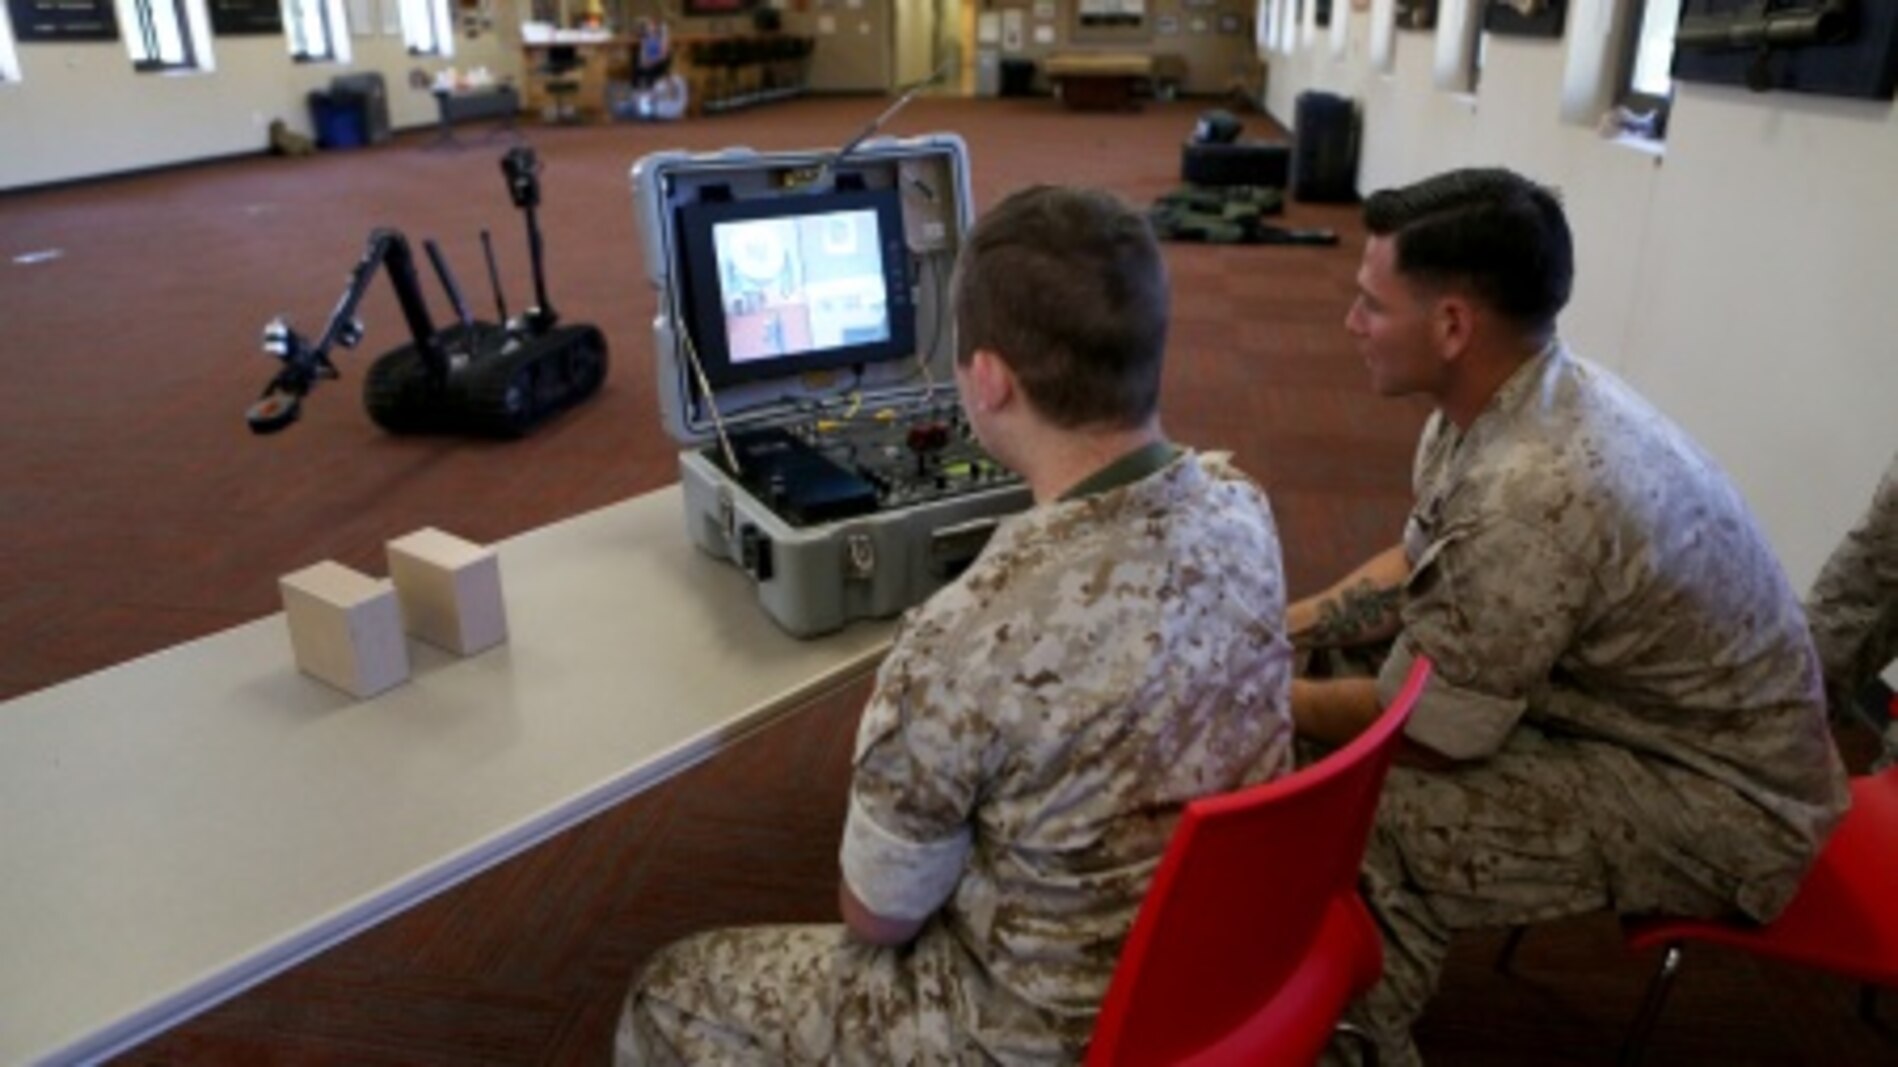 James Gallant, a young man diagnosed with brain cancer, operates the TALON Explosive Ordnance Disposal robot with Marines of 1st EOD Company, 1st Marine Logistics Group, aboard Camp Pendleton, Calif., July 25, 2015. Collaborating with the Make-A-Wish Foundation, 1st EOD helped James experience what being an EOD technician is like by giving him a tour through their library of ordnance and EOD tools, teaching him to operate the TALON bomb disposing robot and presenting him with his own desert utilities and EOD badge.
